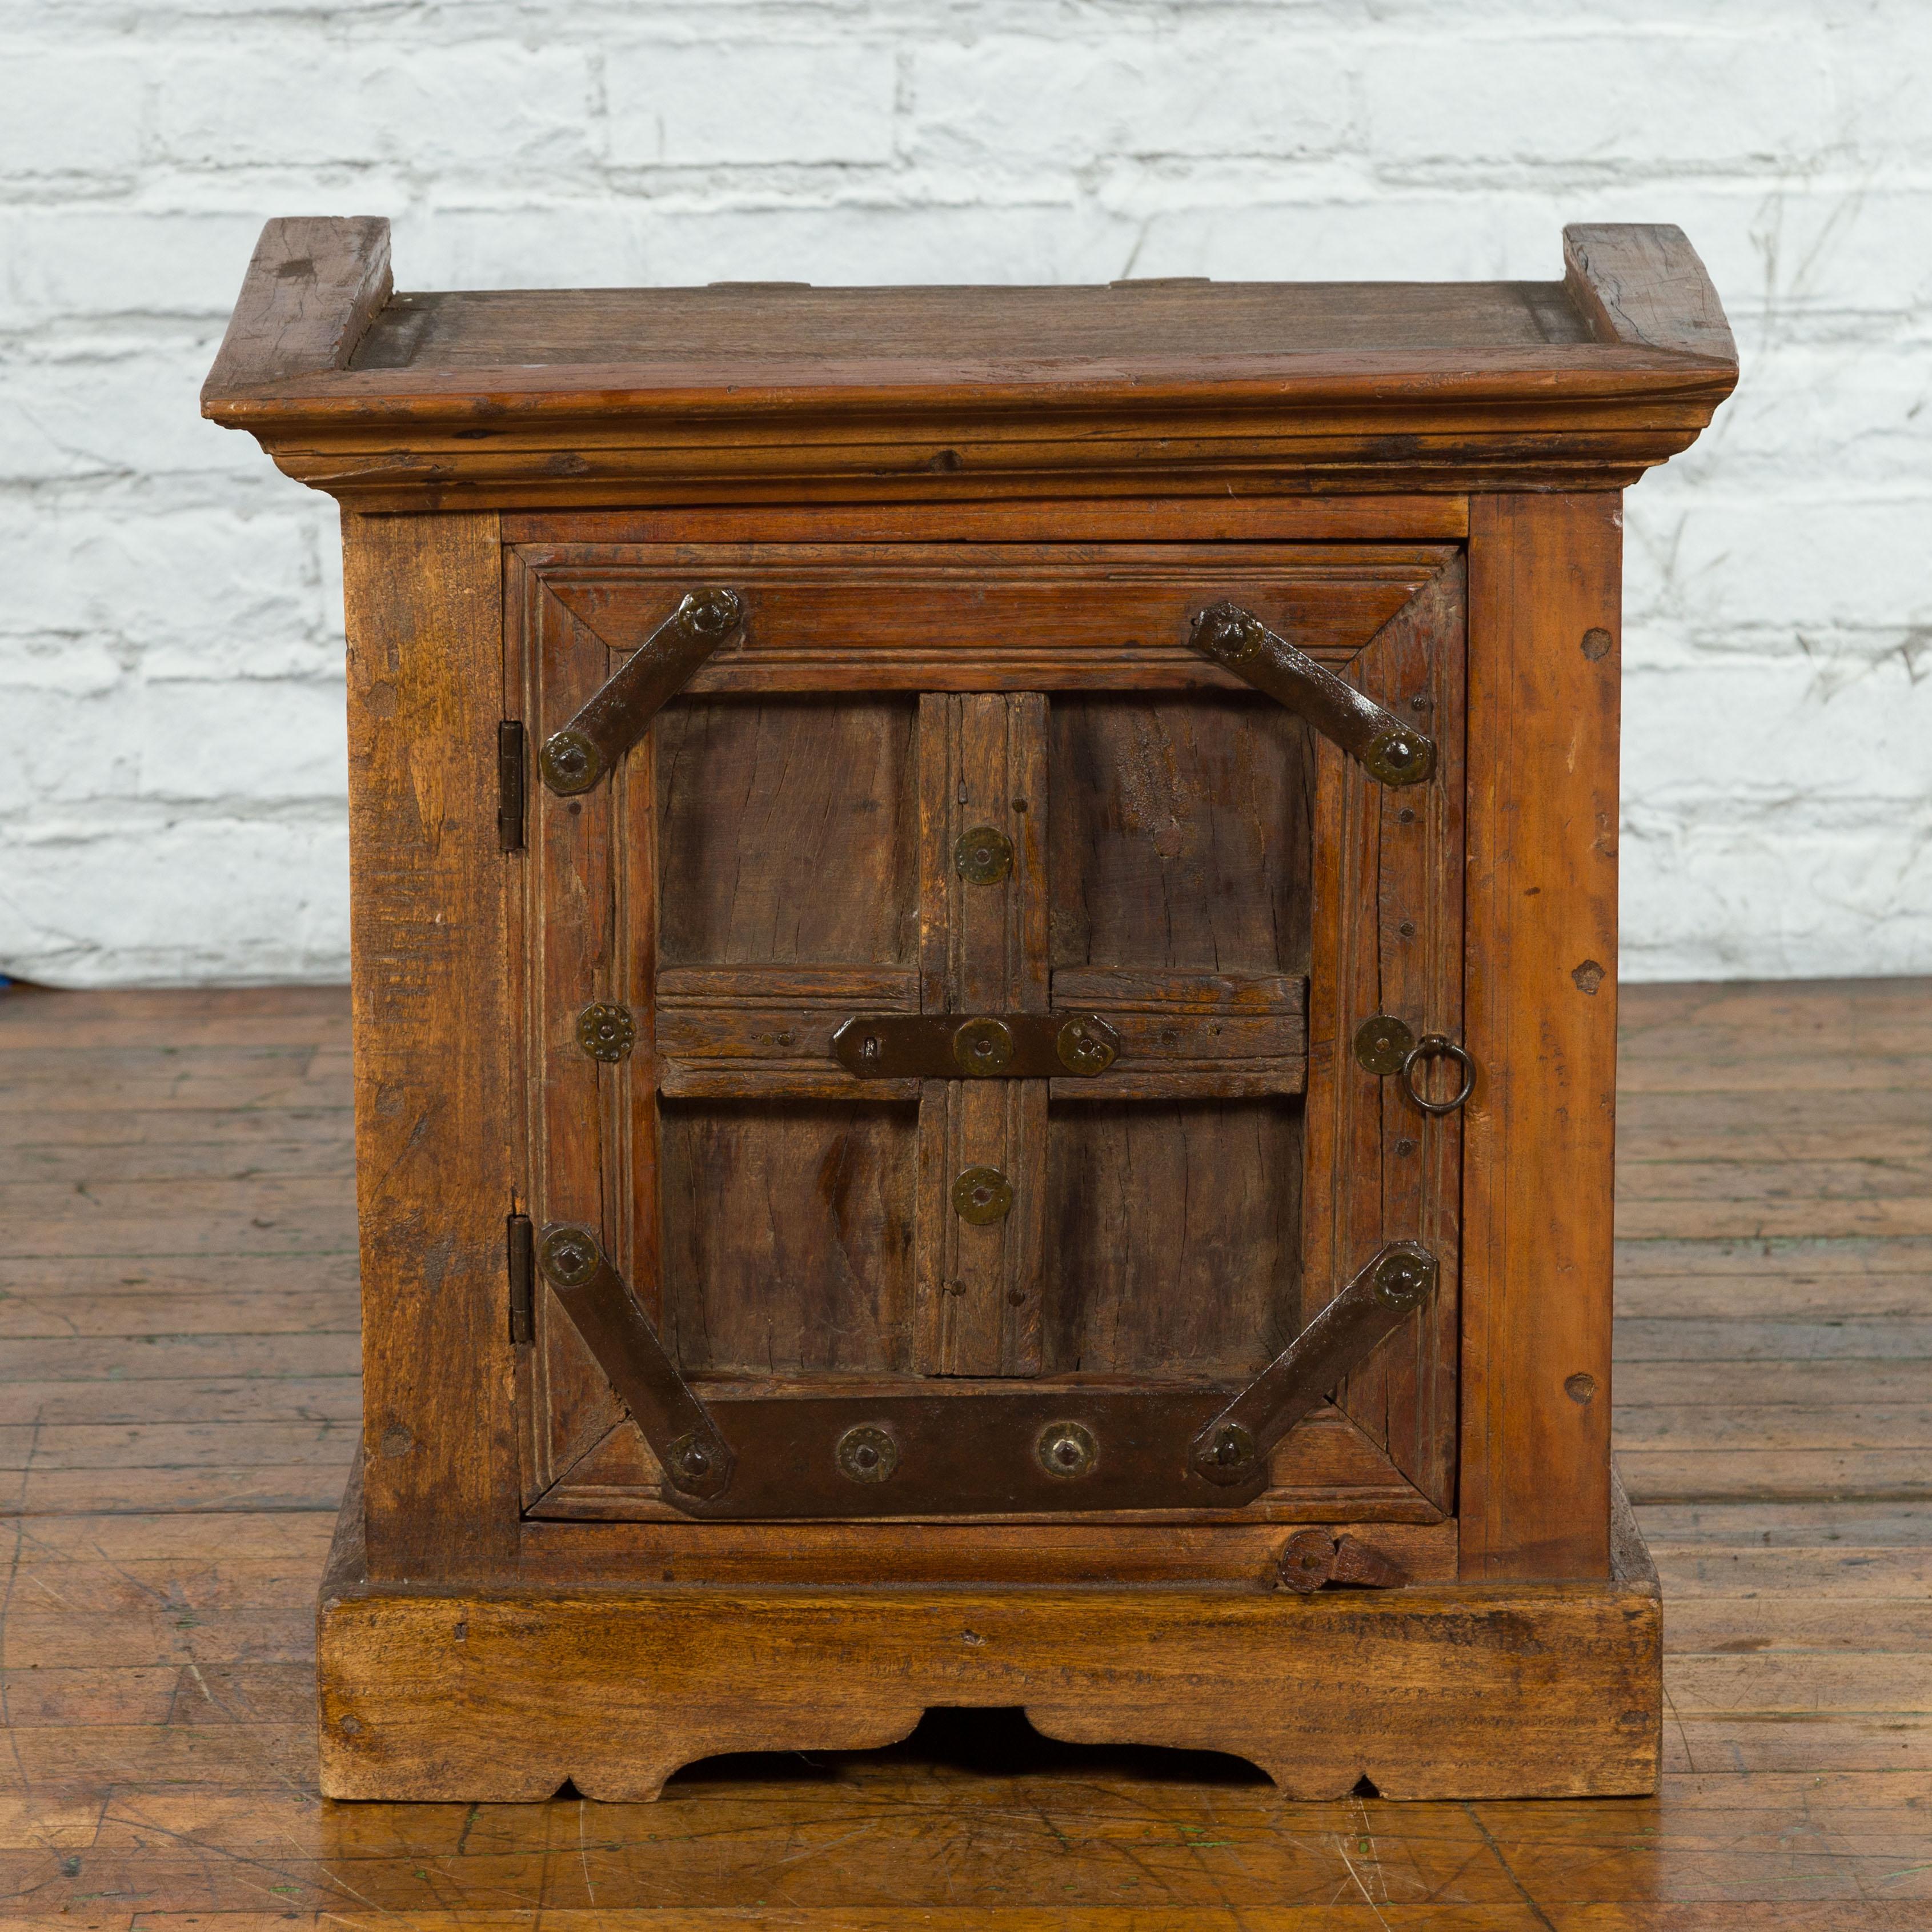 A vintage Indian sheesham wood side cabinet from the mid 20th century with natural finish, single door, iron hardware, scalloped plinth and rustic character. Created in India during the Midcentury period, this rustic small sheesham wood bedside